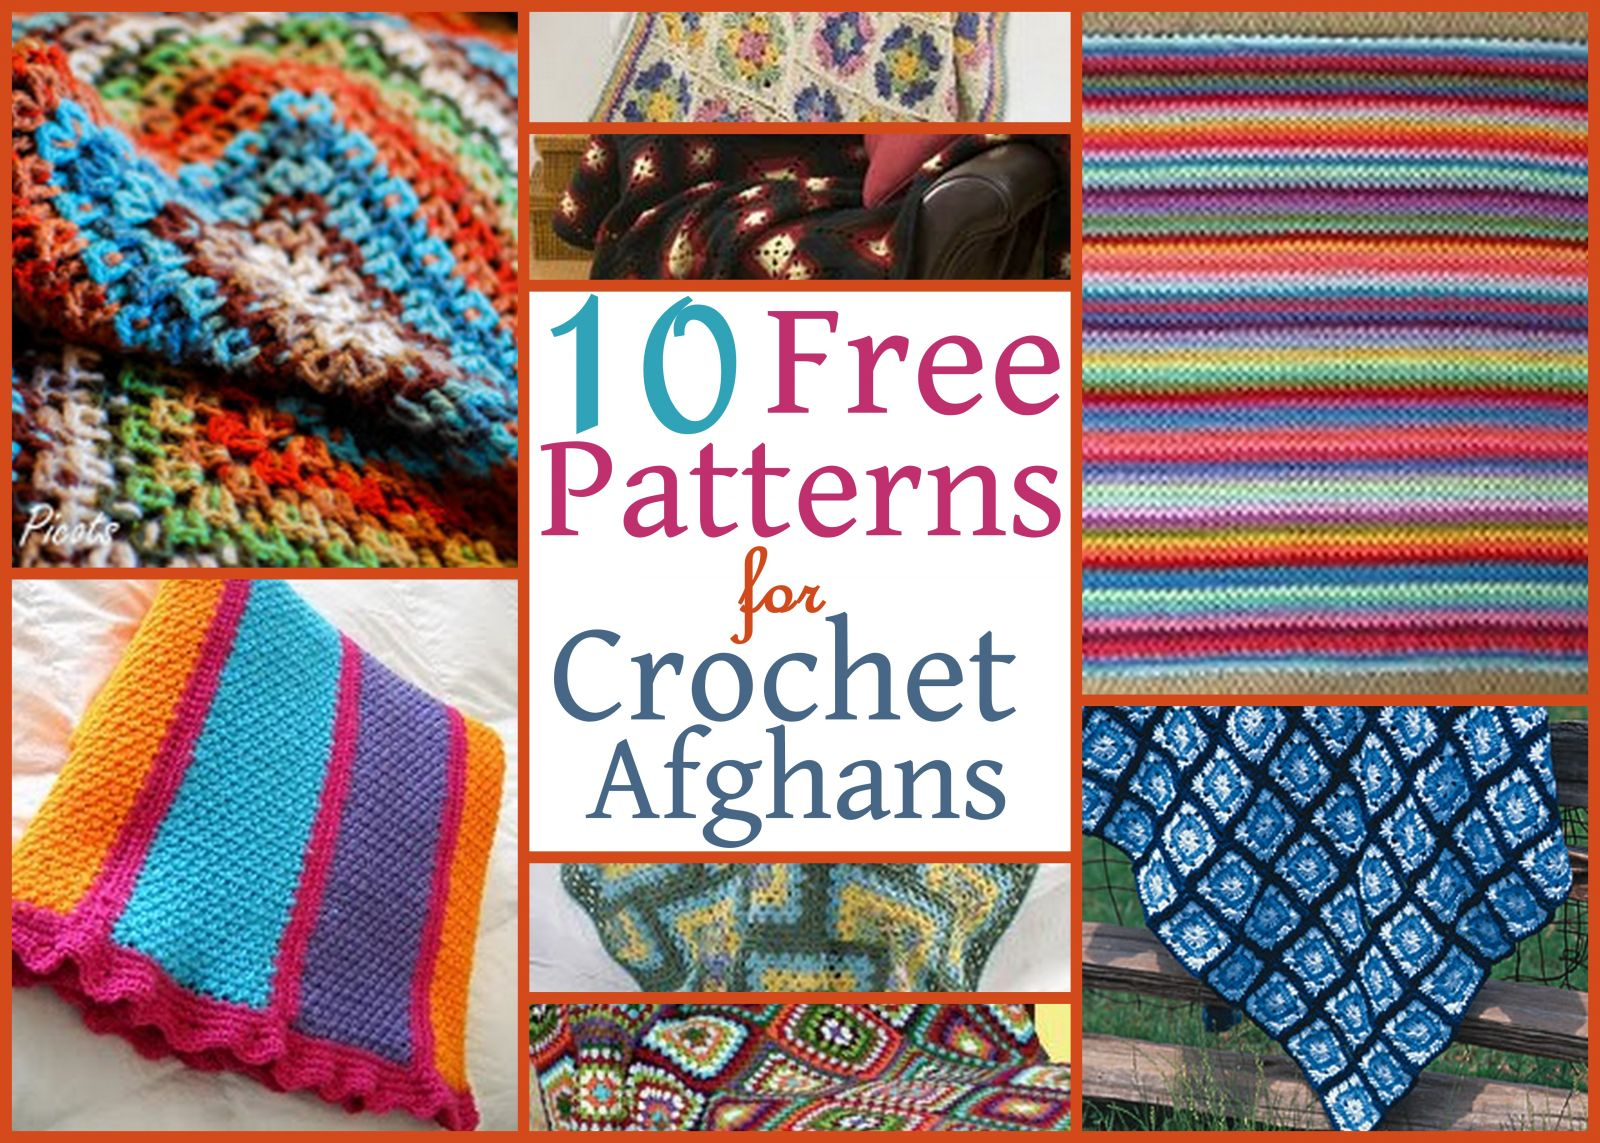 Free Crochet Afghan Pattern 10 Free Patterns For Crochet Afghans Allfreecrochetafghanpatterns